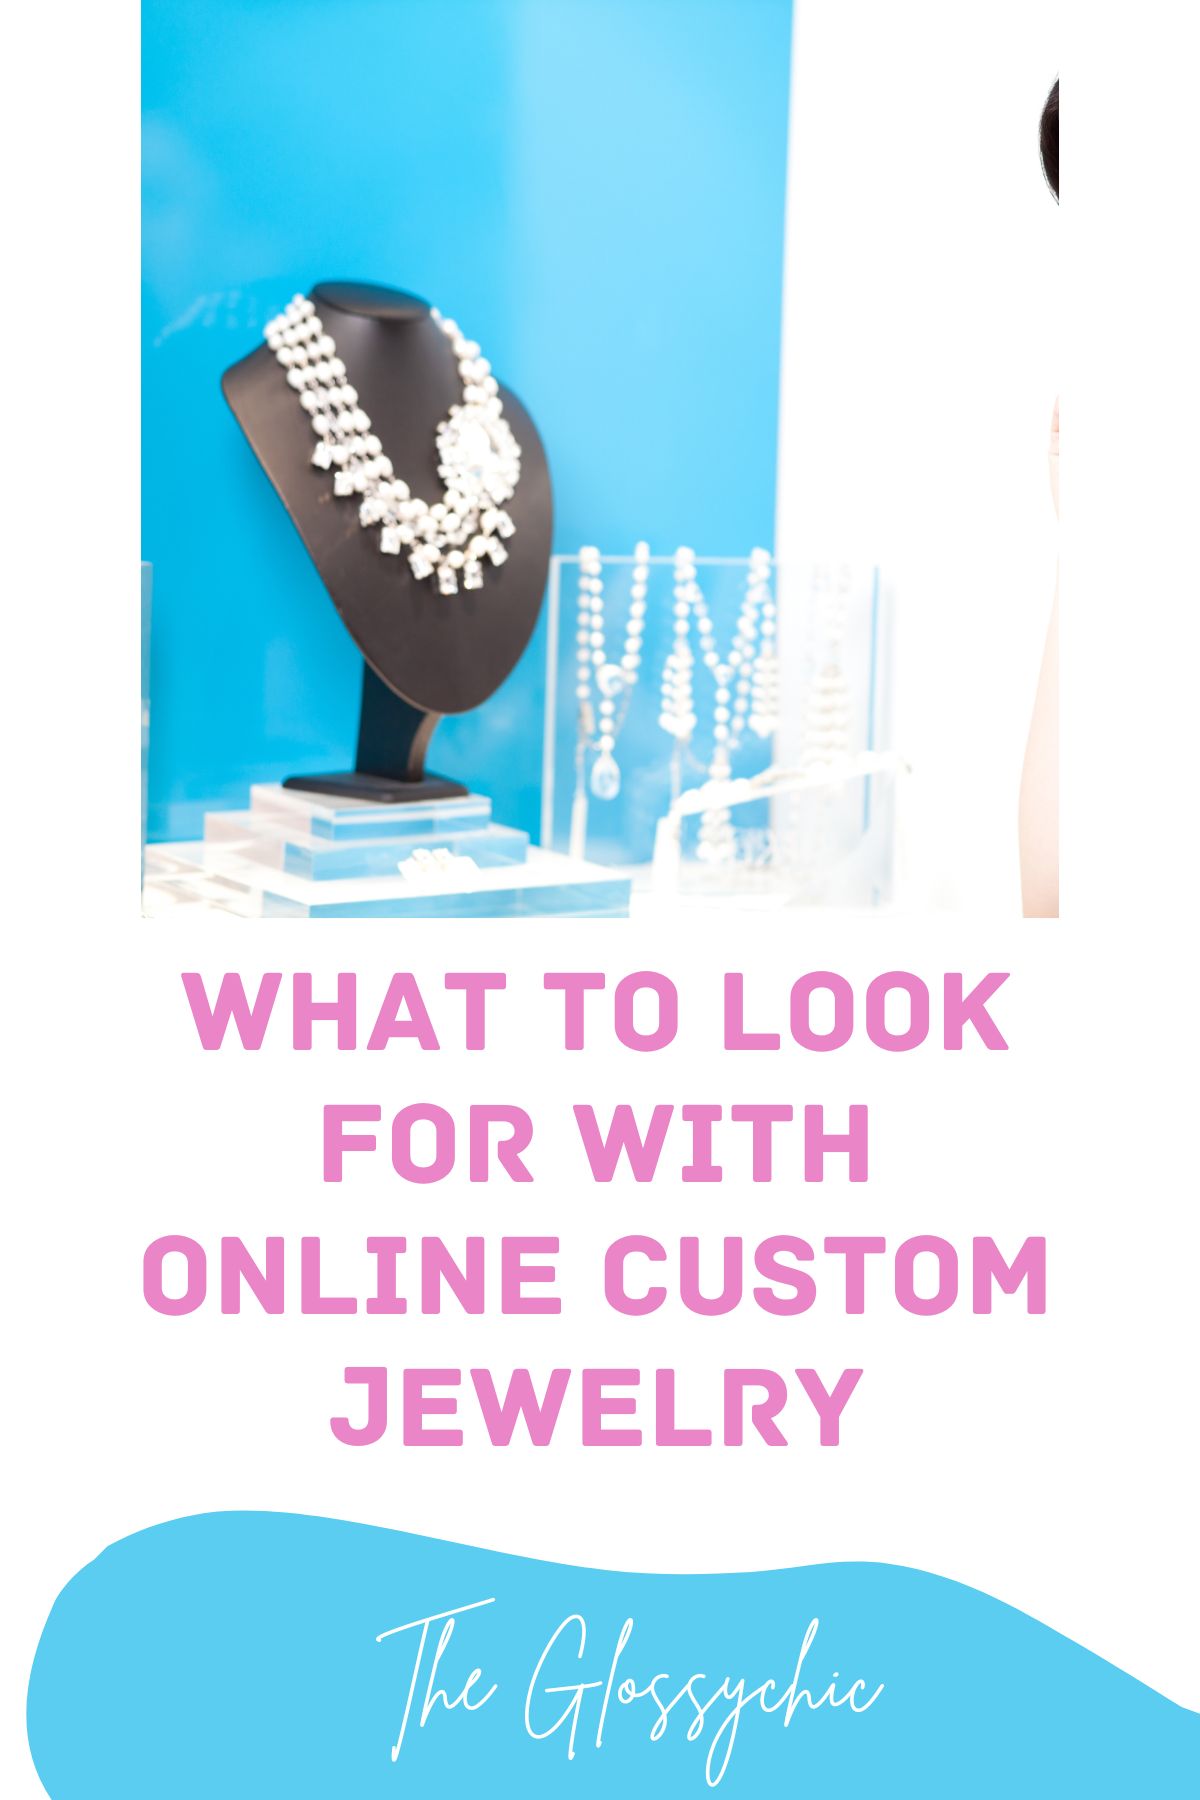 What to Look for with Online Custom Jewelry